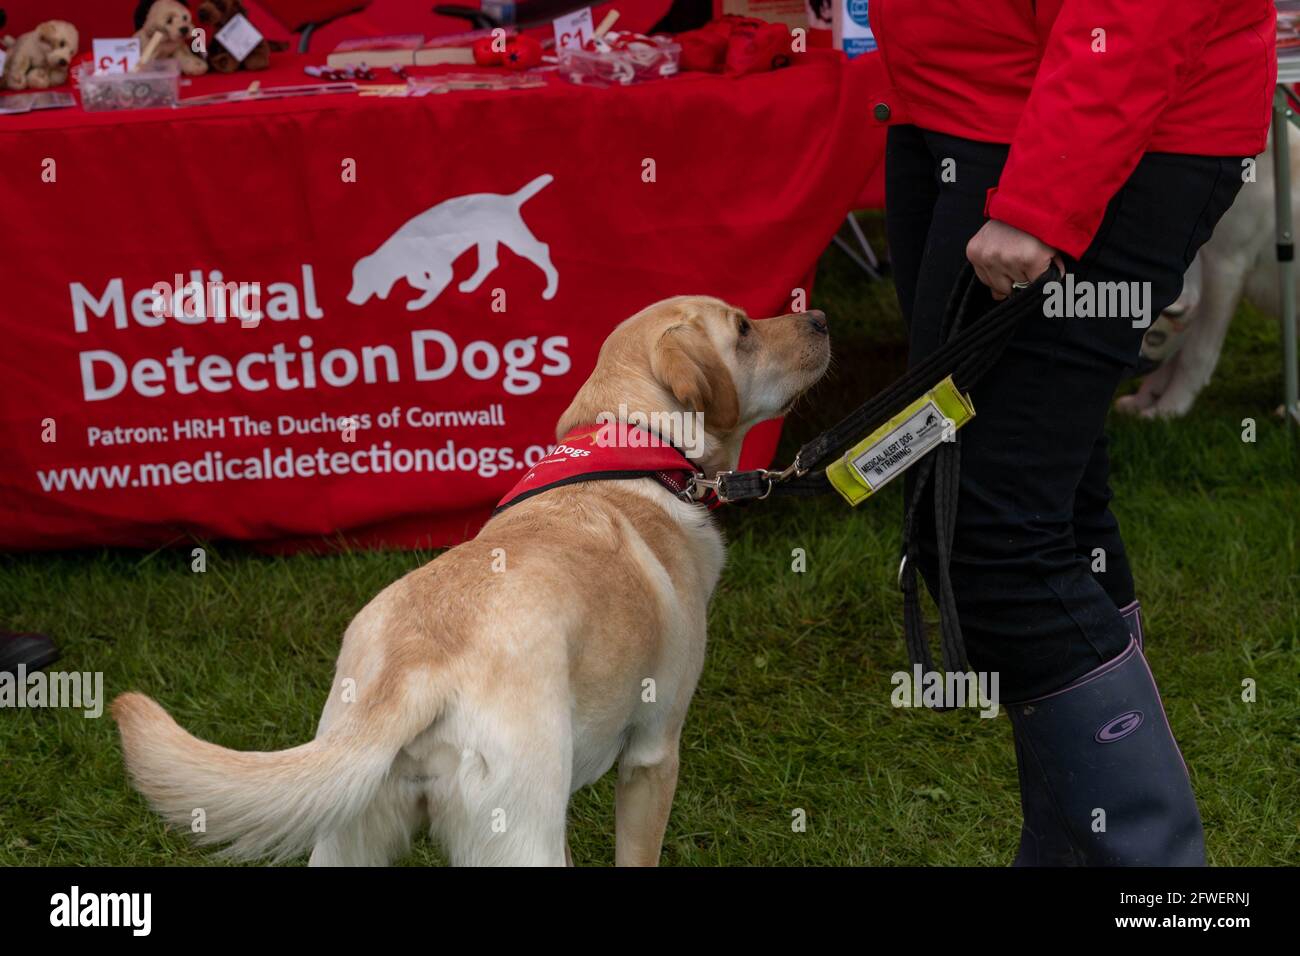 Brentwood Essex 22 mai 2021 The Weald Park Country show, Weald Festival of Dogs, Weald Festival of Cars, Weald Country Park, Brentwood Essex, Medical Detection Dog Credit: Ian Davidson/Alay Live News Banque D'Images